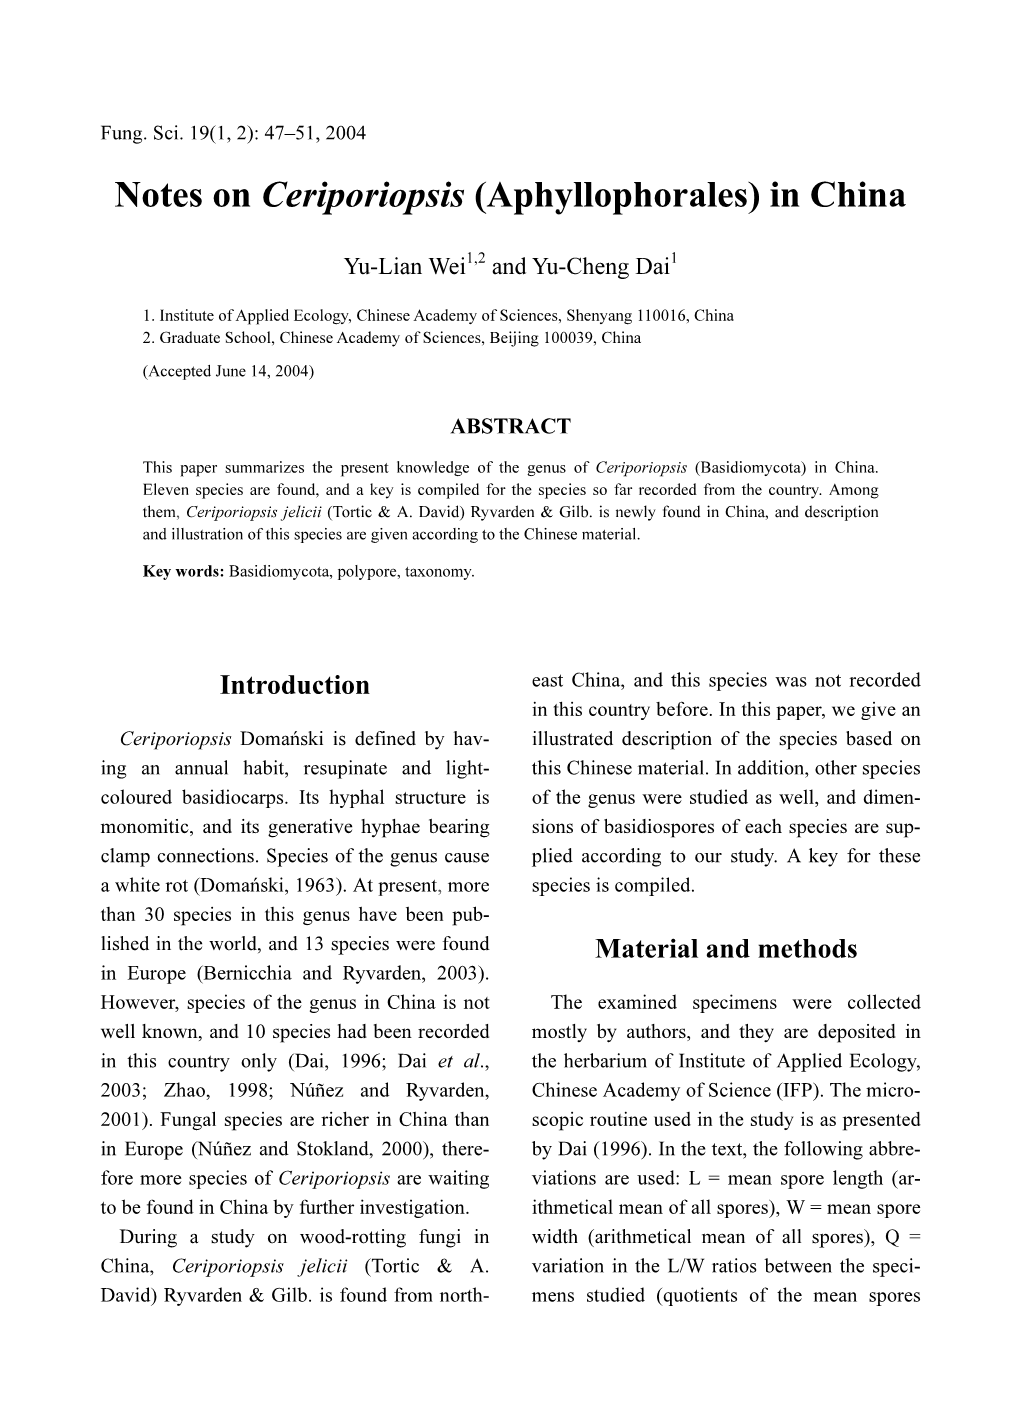 Notes on Ceriporiopsis (Aphyllophorales) in China